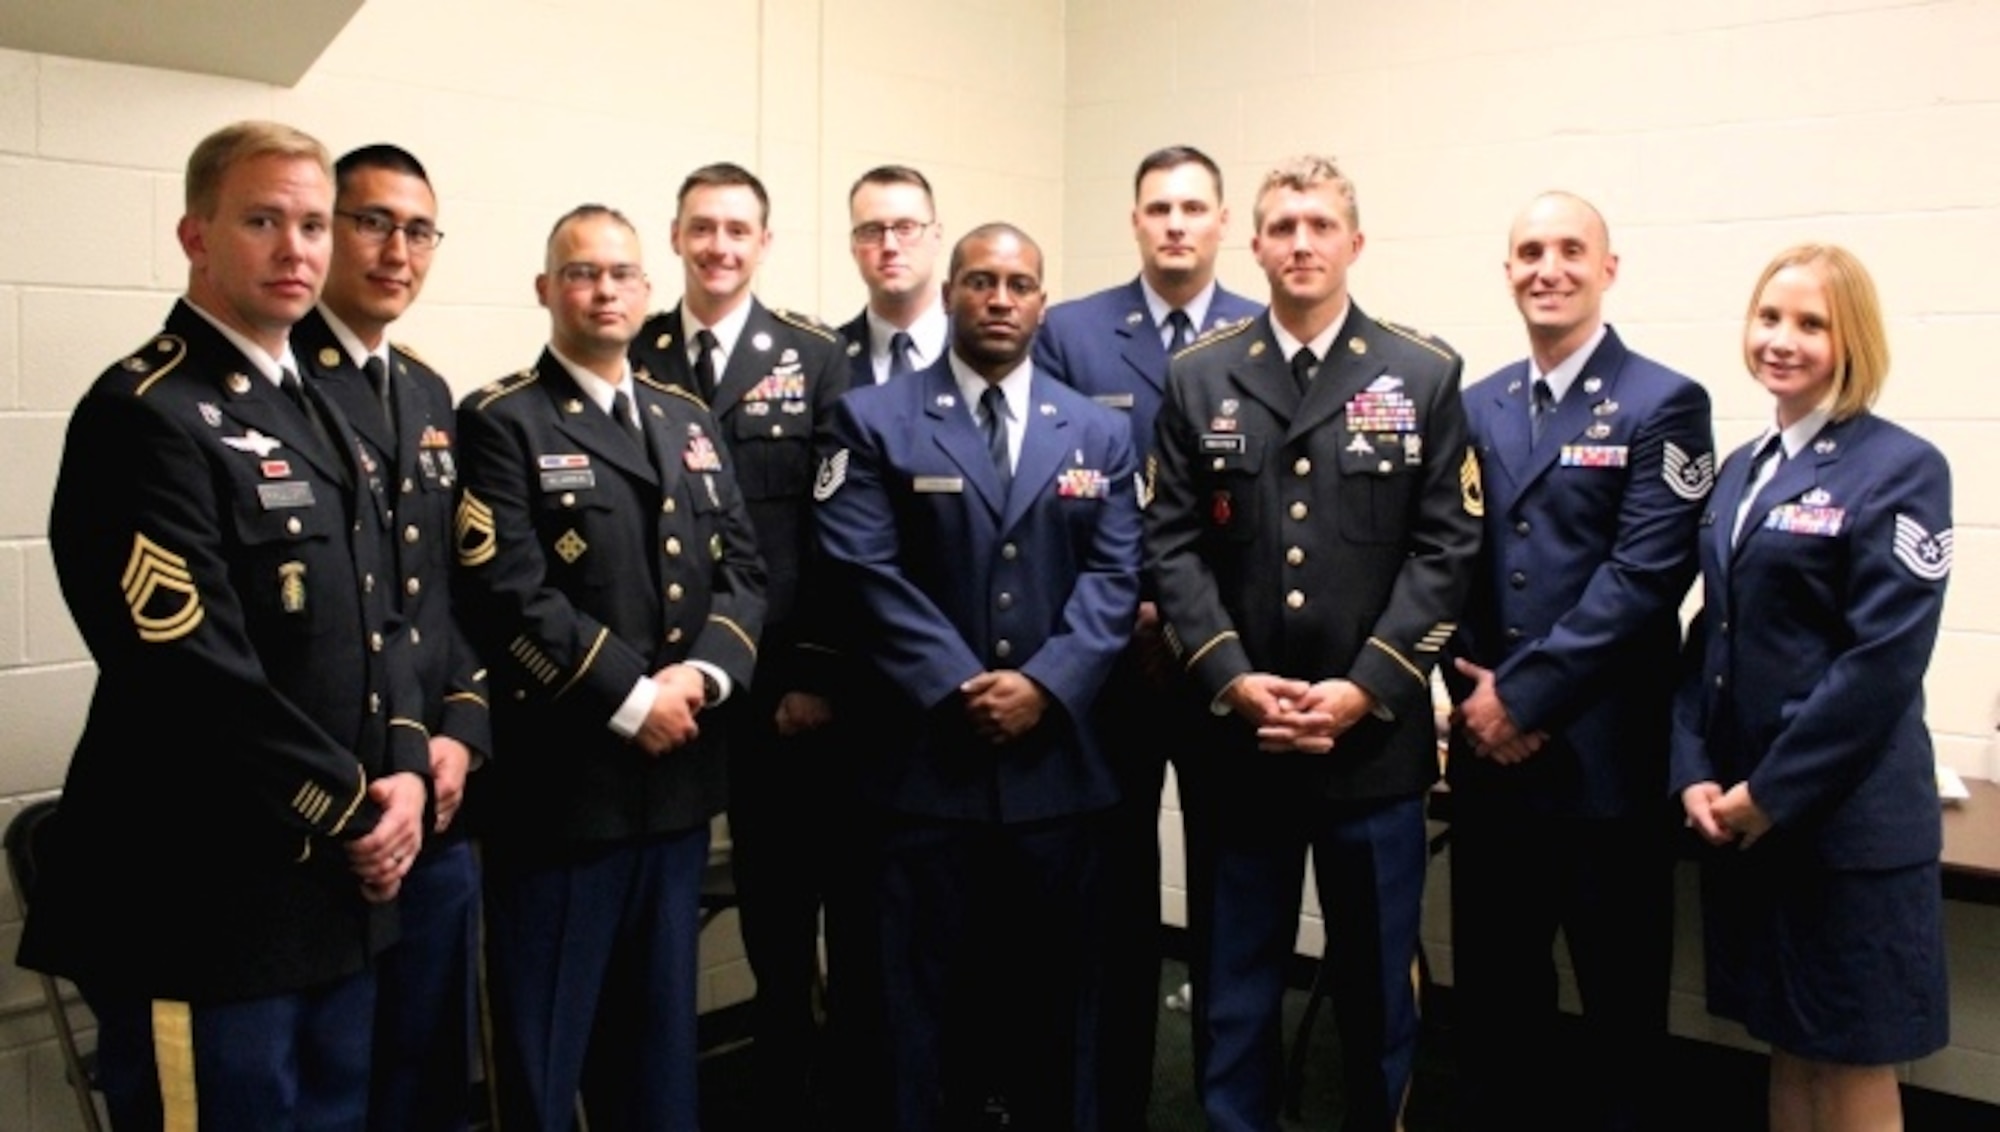 The charter class of the Enlisted to Medical Degree Preparatory Program, including both Air Force and Army students, graduated on May 11, 2016 during a commencement ceremony held at George Mason University. The Enlisted to Medical Degree Preparatory Program is a partnership between the Armed Services and Uniformed Services University. Designed for enlisted service members, the two-year program enables members to remain on active duty status while enrolled as full-time students in preparation for application to medical school. (U.S. Air Force photo by Prerana Korpe, AFMS Public Affairs)